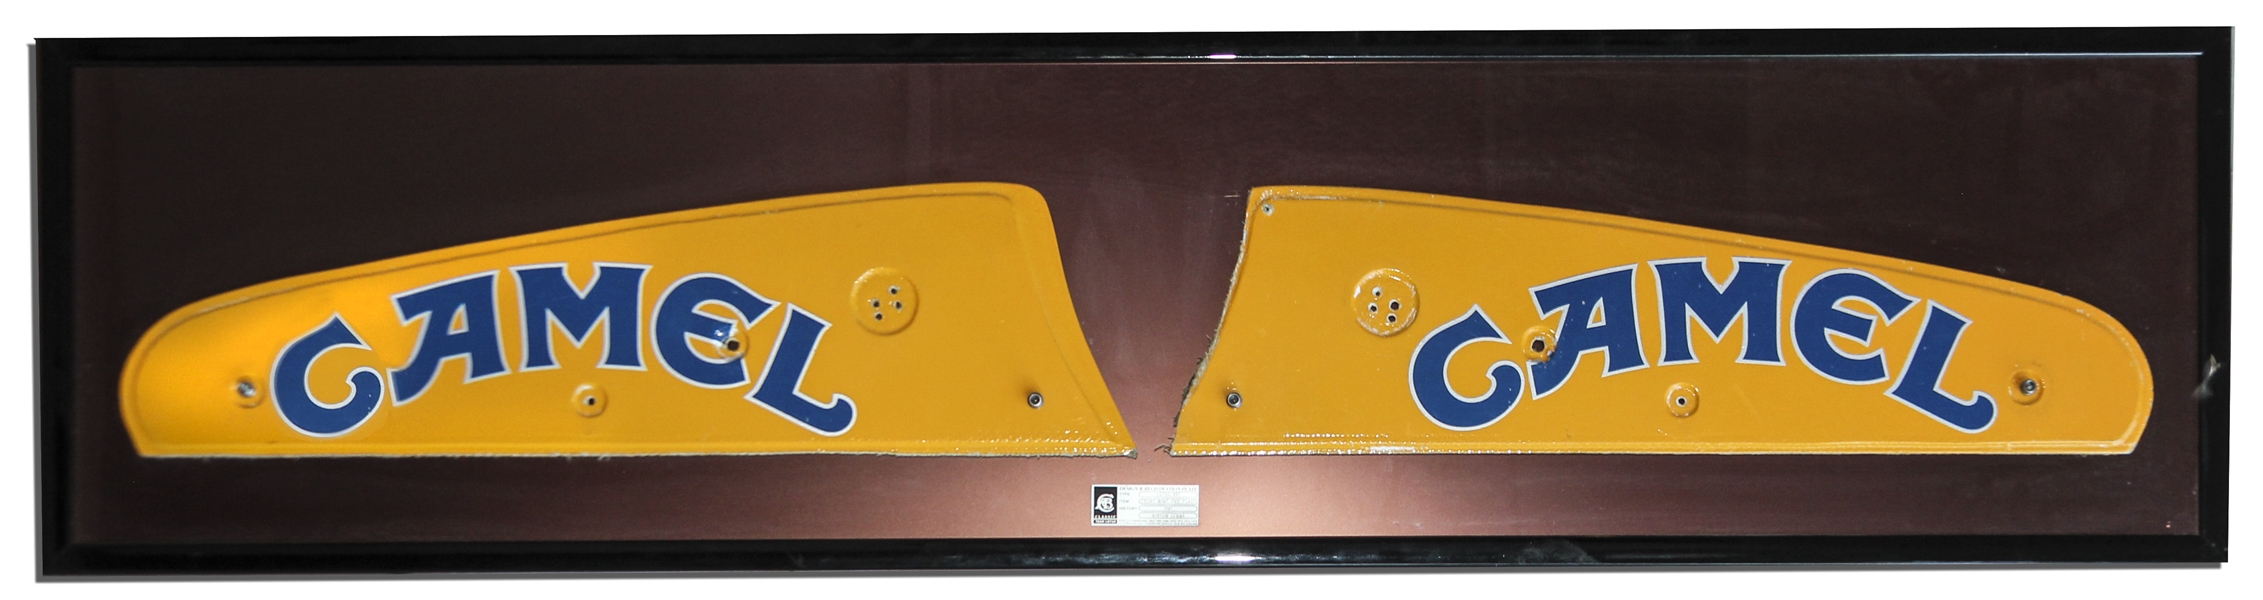 Ayrton Senna's Pair of Race-Used Front Wing End Plates From His Lotus 99T Car